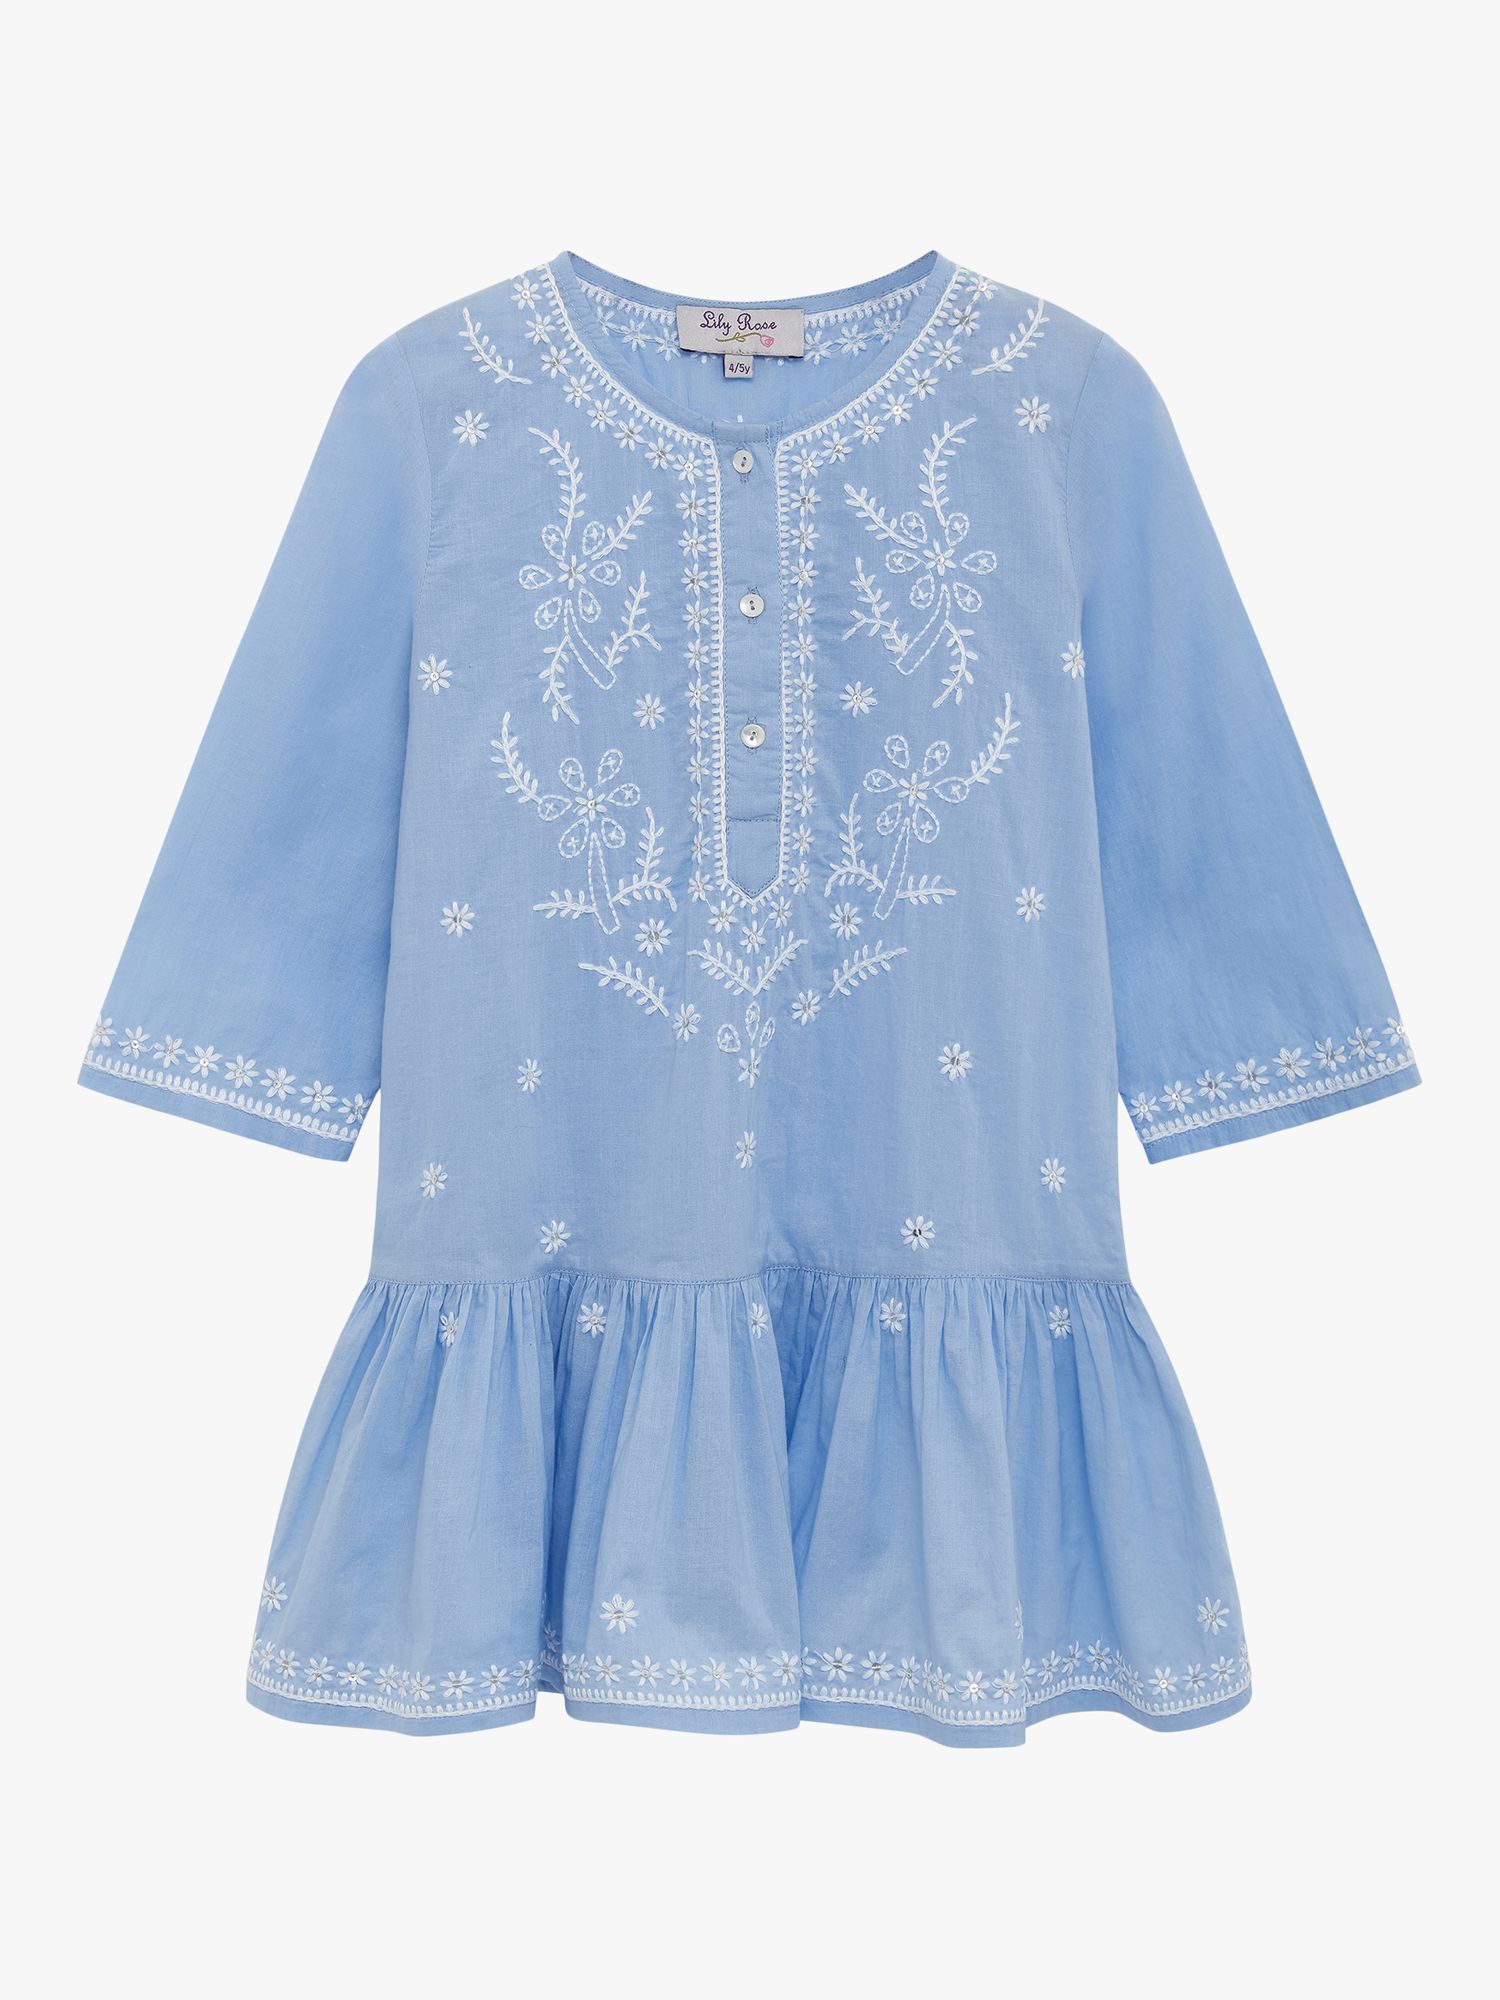 Trotters Kids' Floral Embroidered Kaftan, Blue/White, 2-3 years